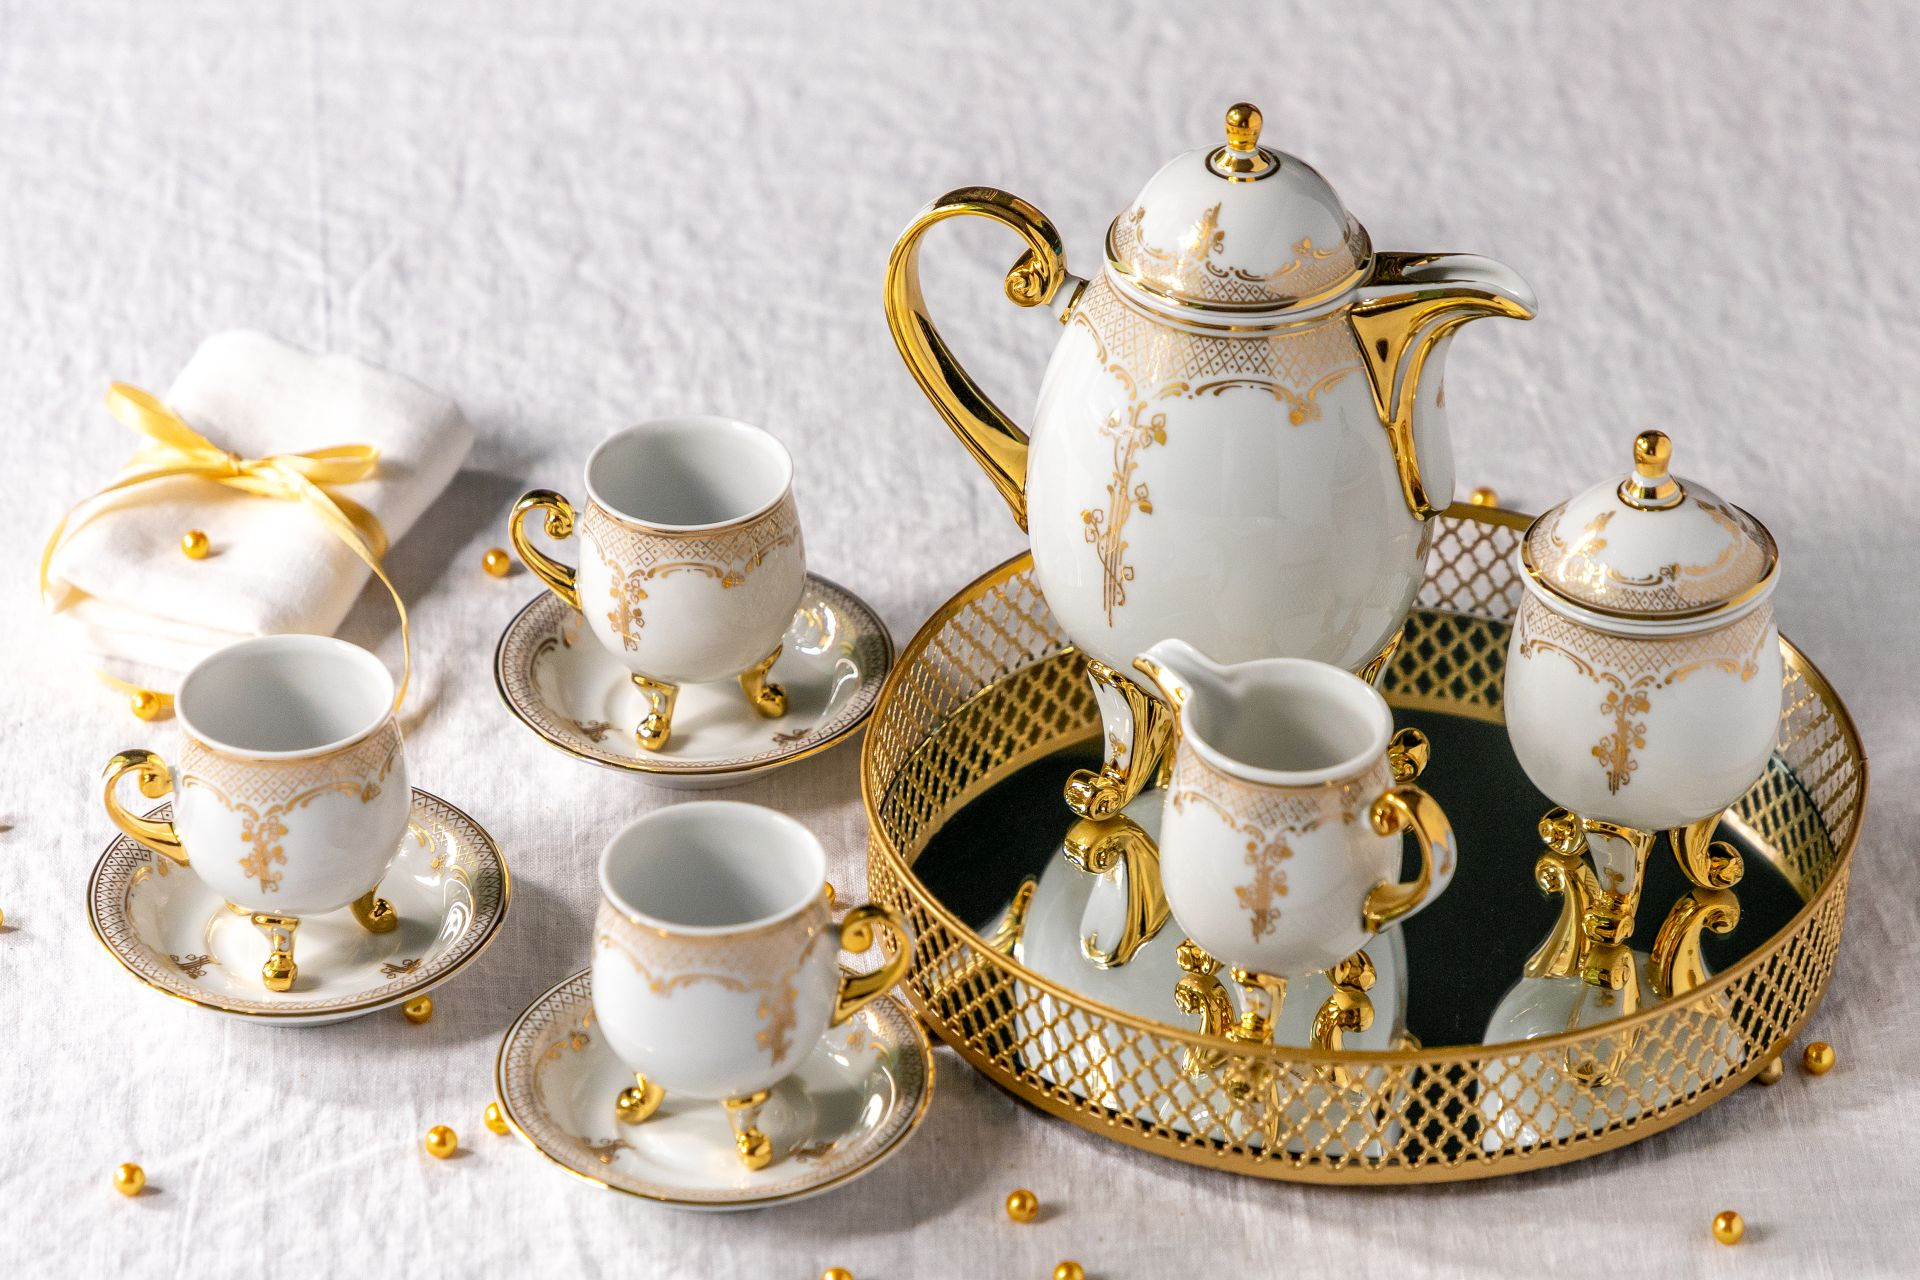 A royal reception – with the new No. 837 Elisabeth coffee set pic